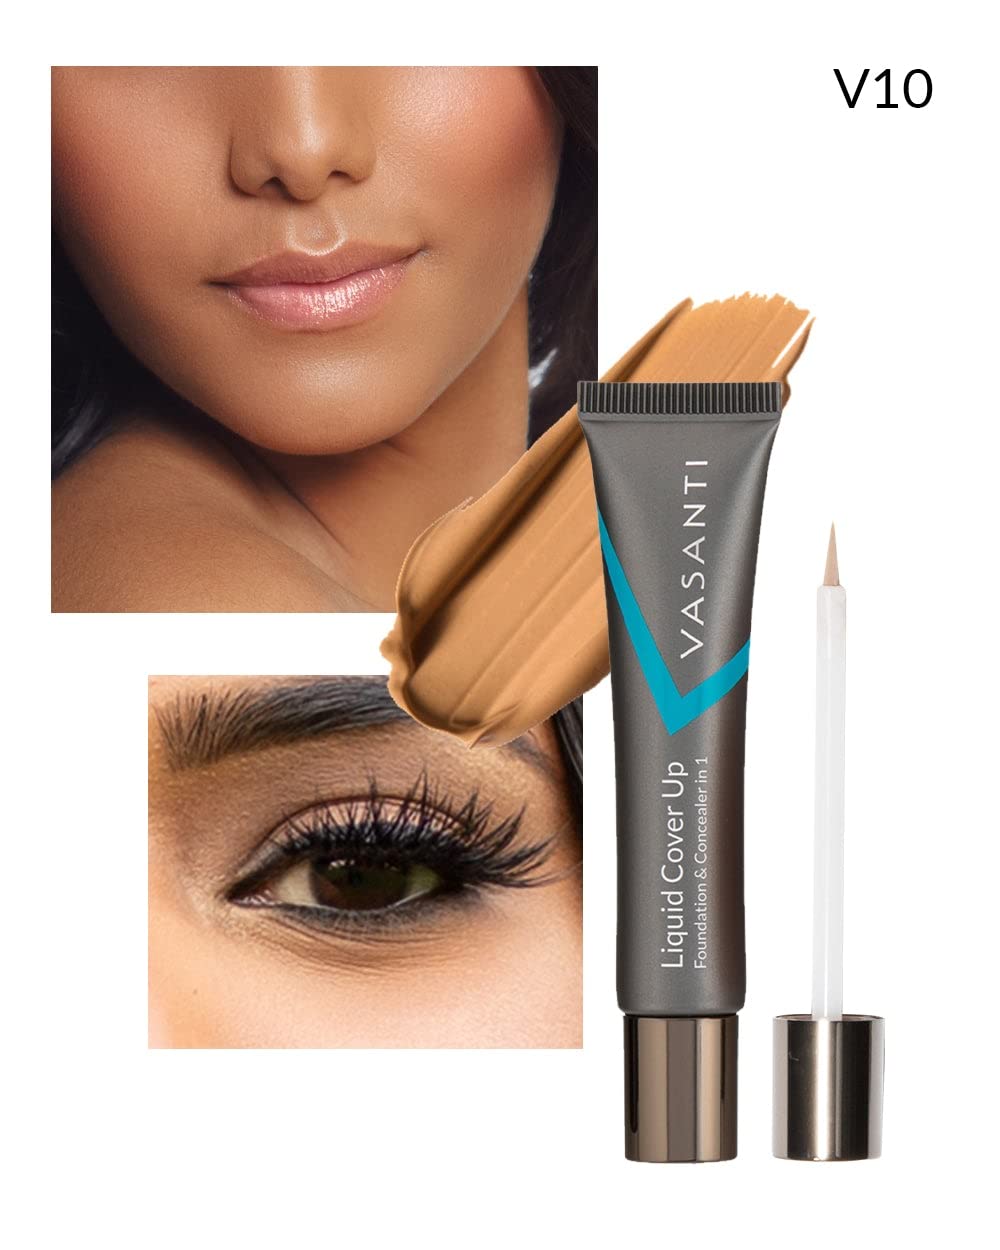 VASANTI Oil-Free Foundation & Concealer in 1 - Liquid Cover-Up (V10) Full Coverage Lightweight Long Lasting Paraben-Free Leaves Skin Glowing and Radiant